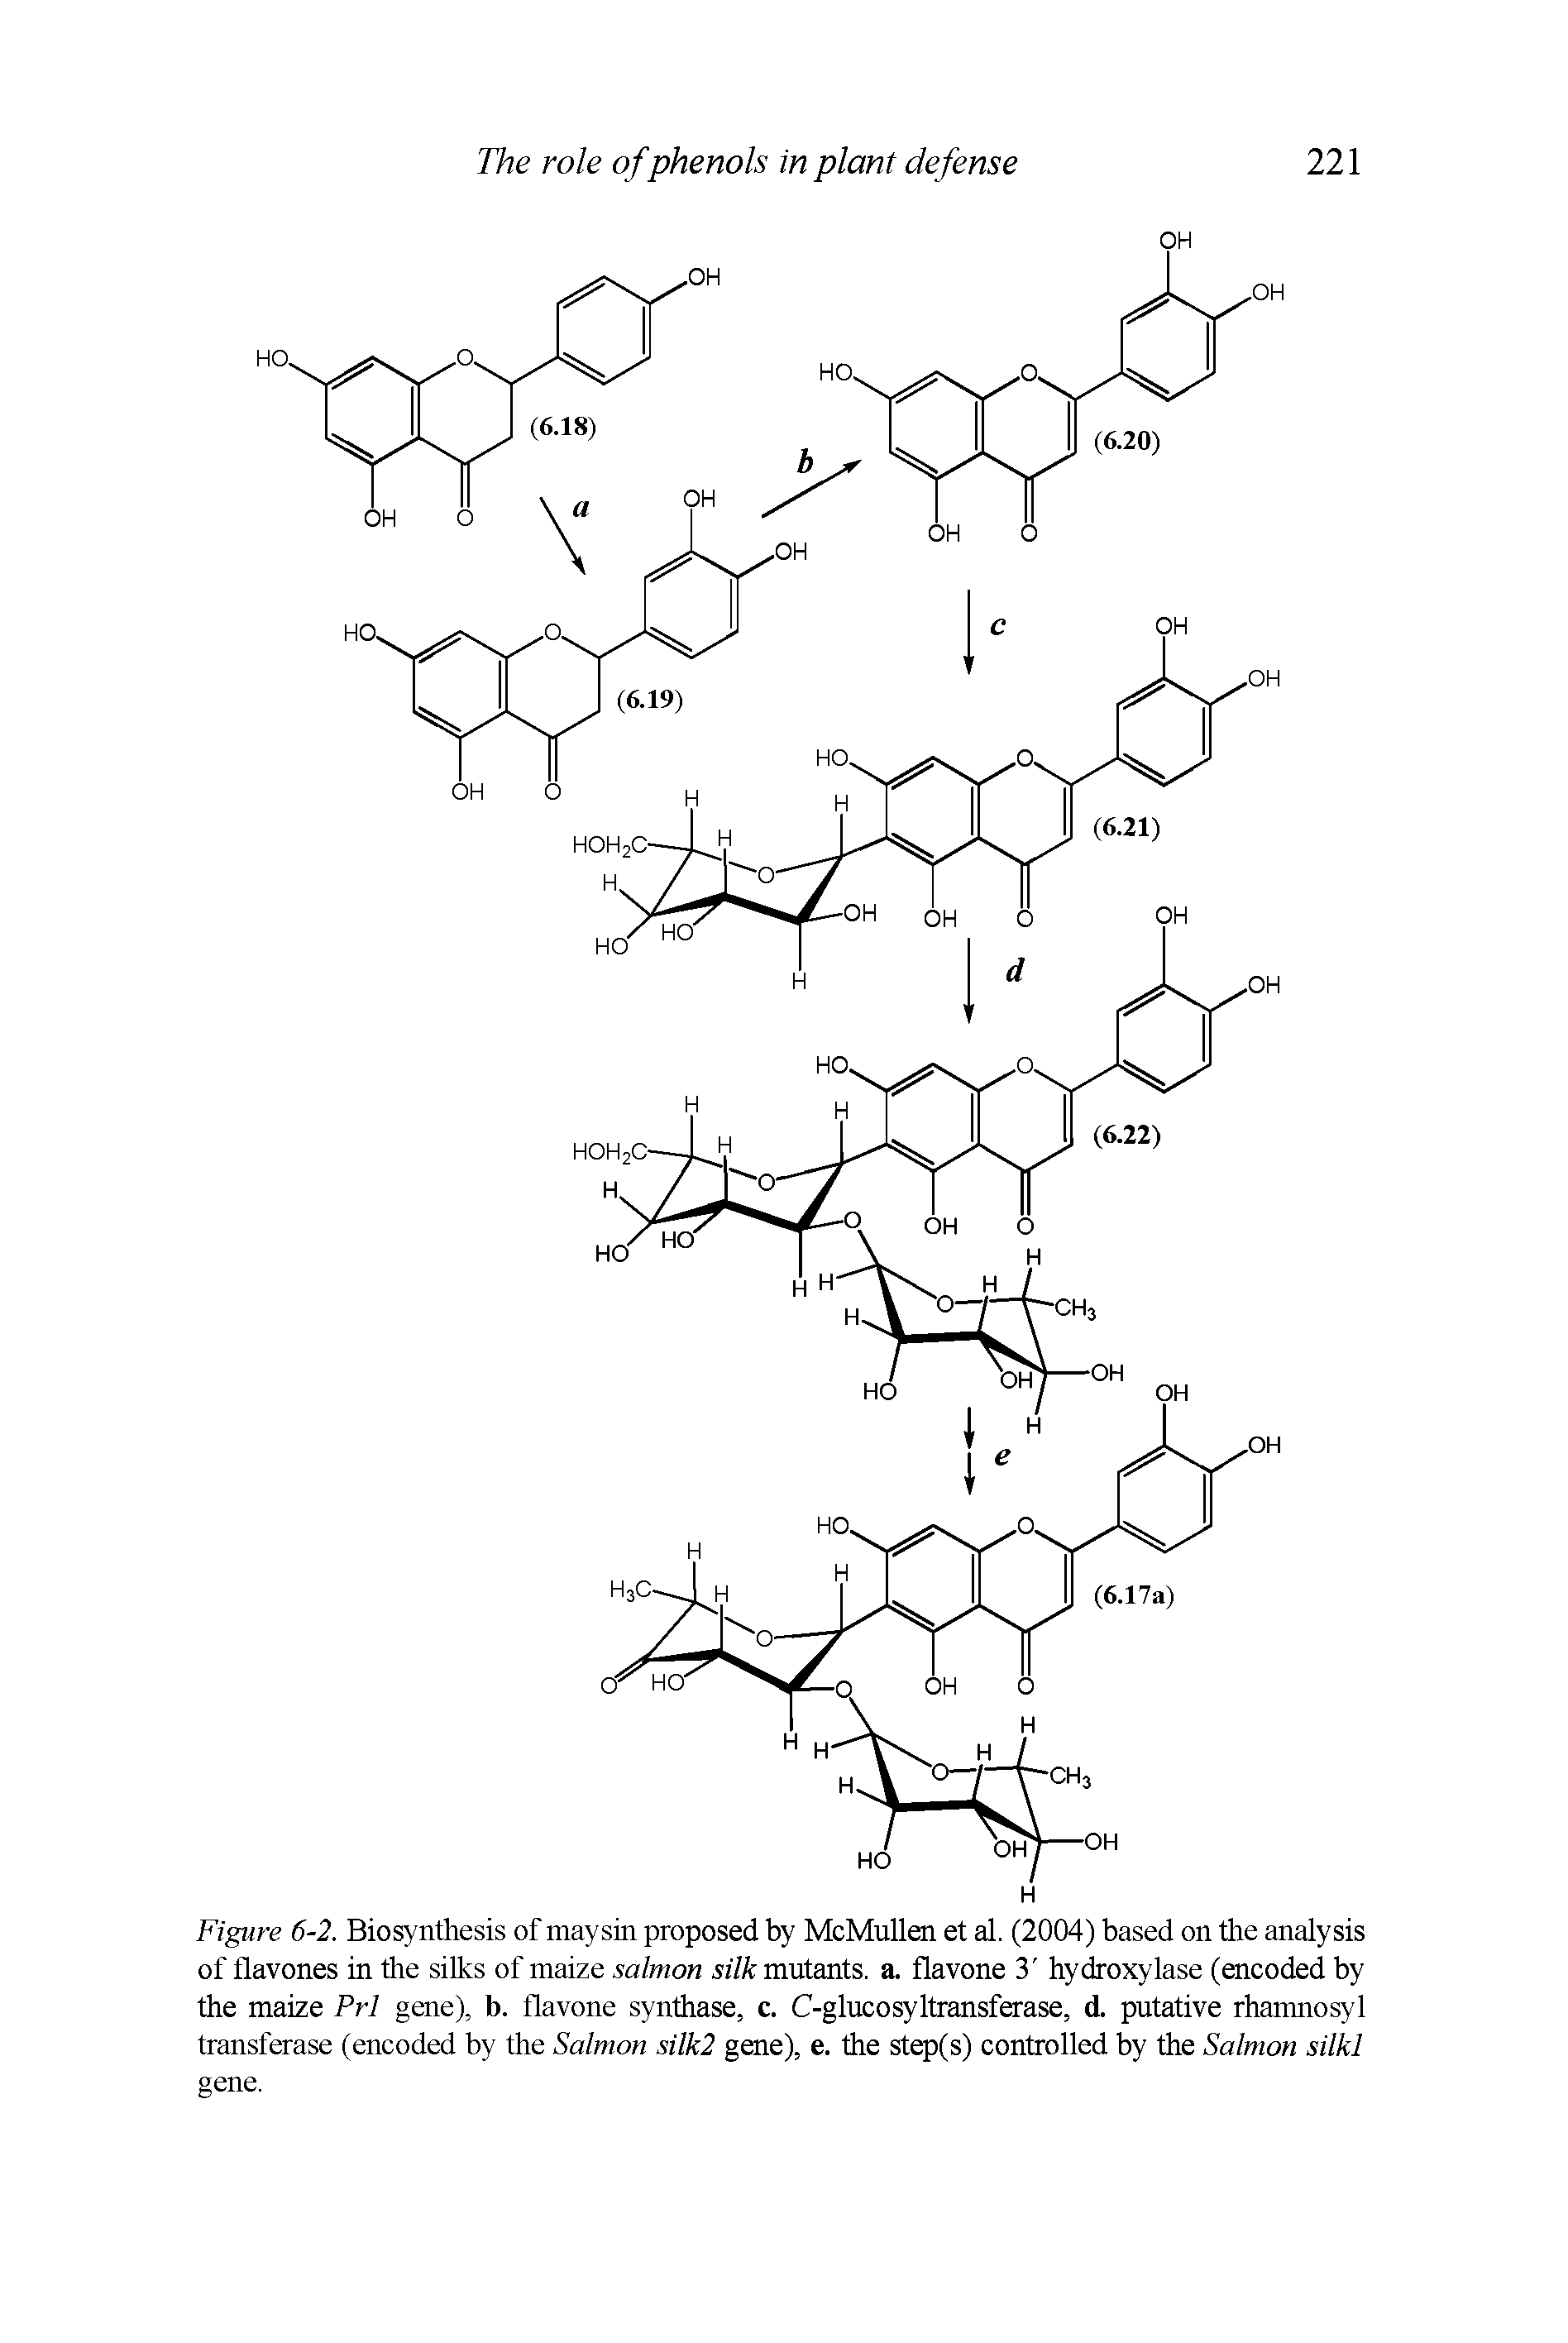 Figure 6-2. Biosynthesis of maysin proposed by McMullen et al. (2004) based on the analysis of flavones in the silks of maize salmon silk mutants, a. flavone 3 hydroxylase (encoded by the maize Prl gene), b. flavone synthase, c. C-glucosyltransferase, d. putative rhamnosyl transferase (encoded by the Salmon silk2 gene), e. the step(s) controlled by the Salmon silkl gene.